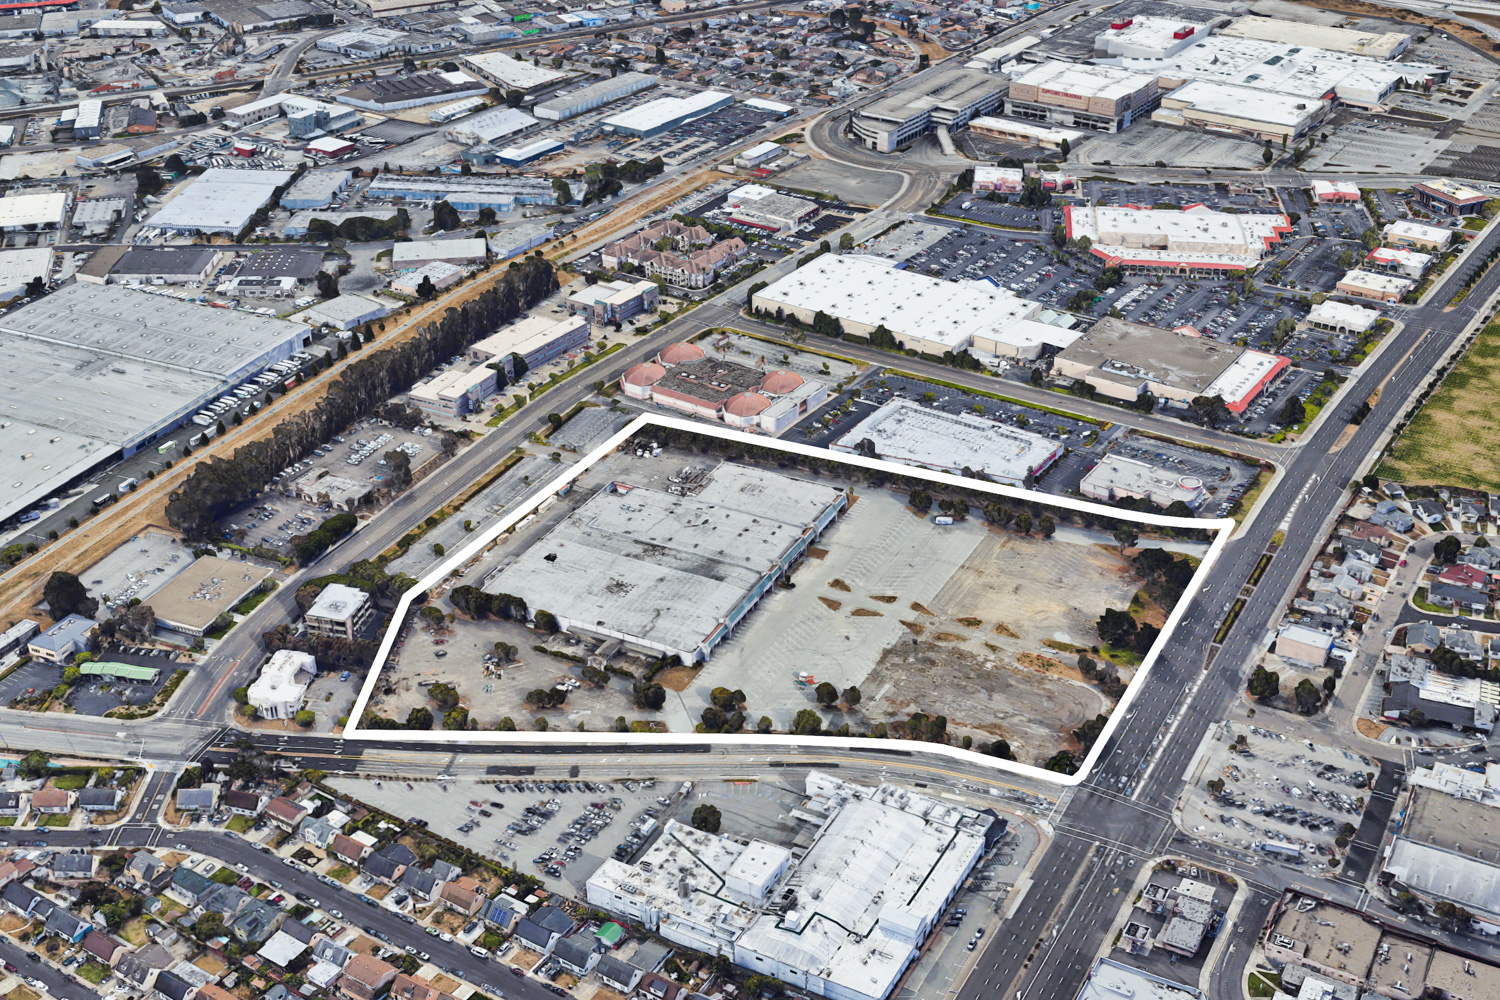 The full development property, of which Safeway will be built on a portion of, image via Google Satellite